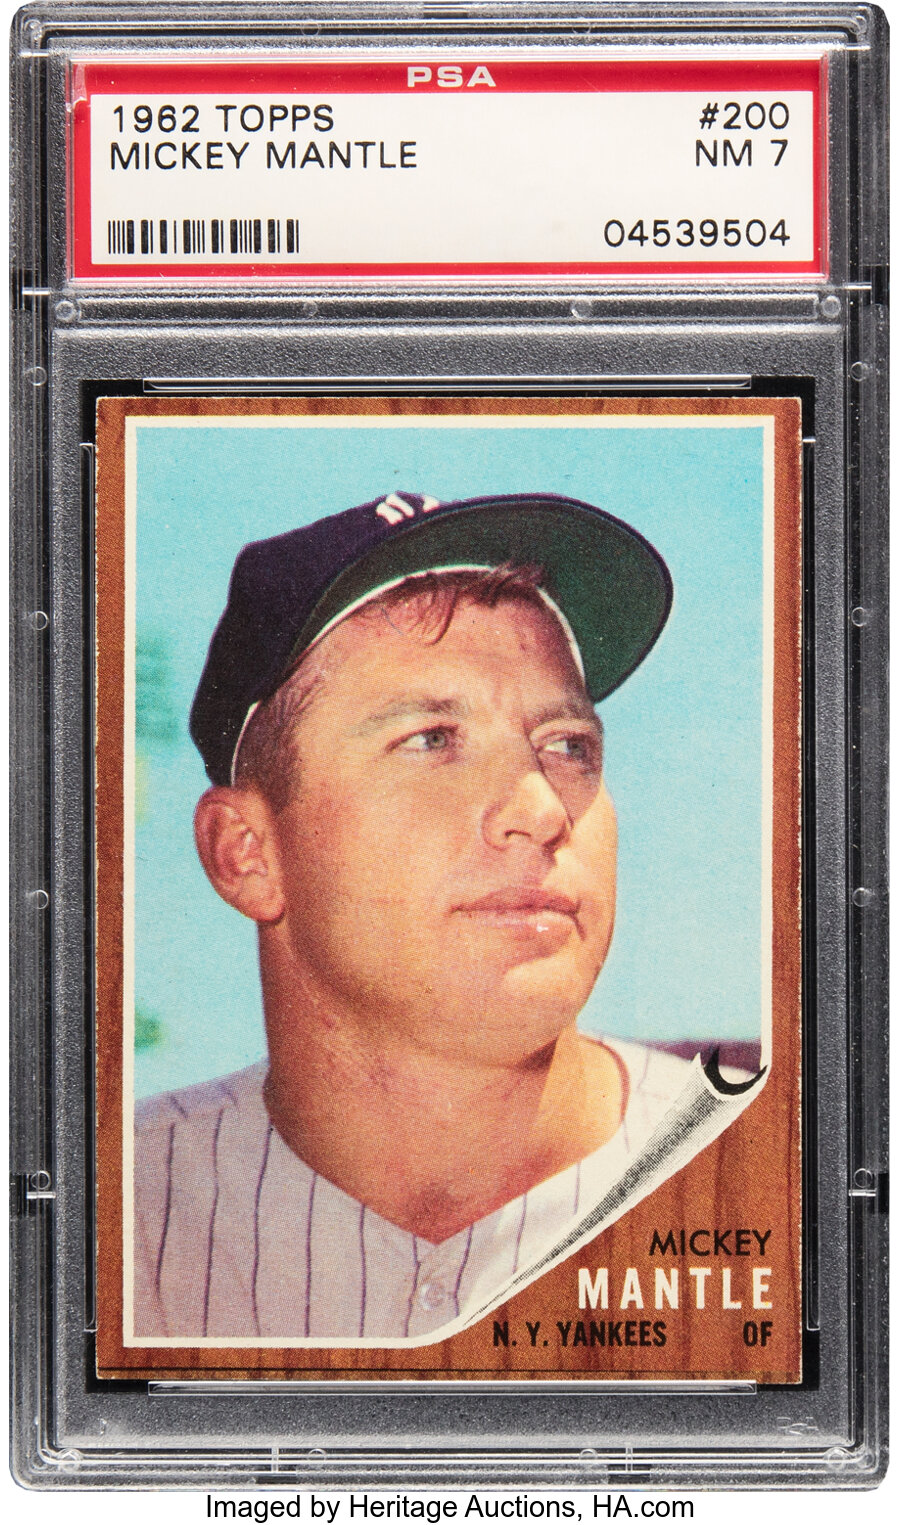 1962 Topps Mickey Mantle #200 PSA NM 7